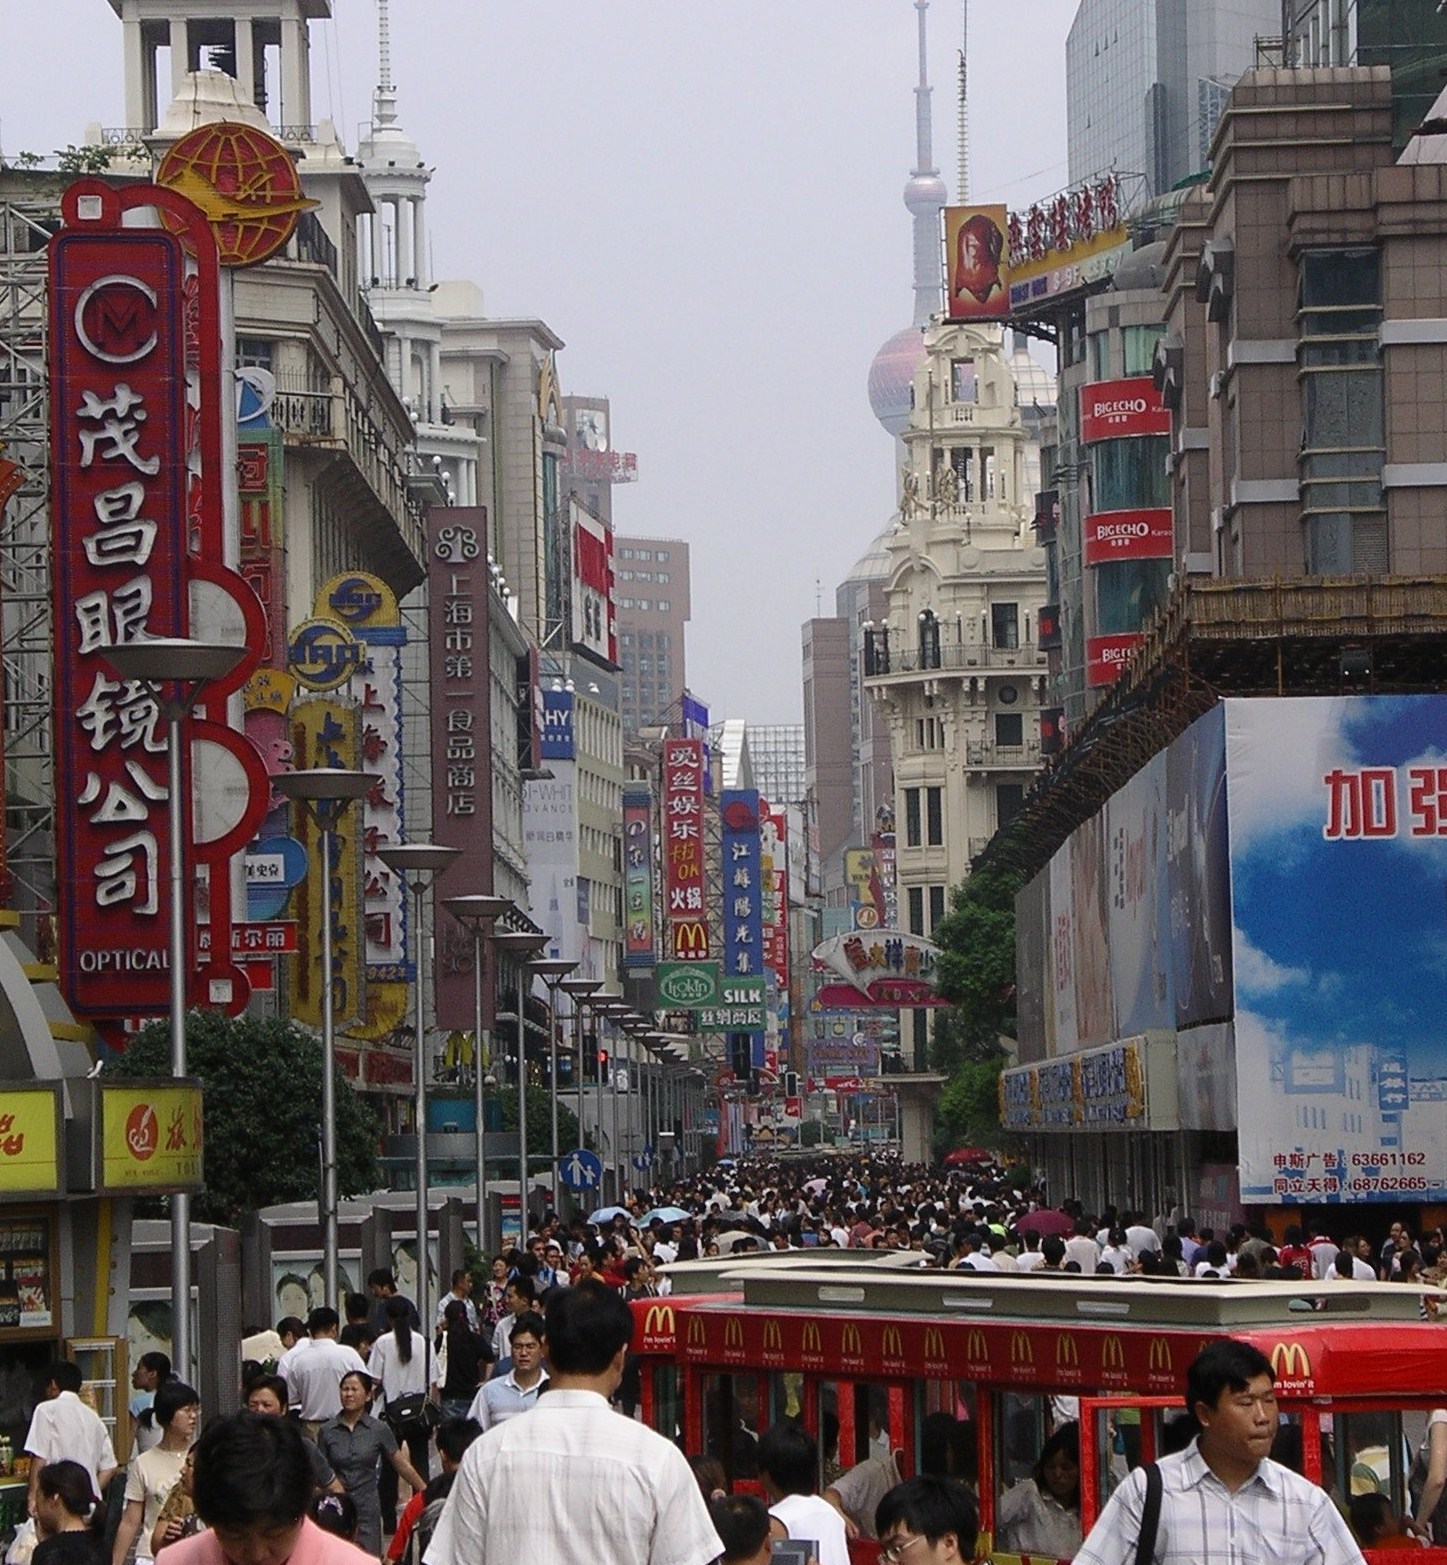 imgx%2Fhumanoverpopulation%2Fchina%2Fchina overpopulated modern city street